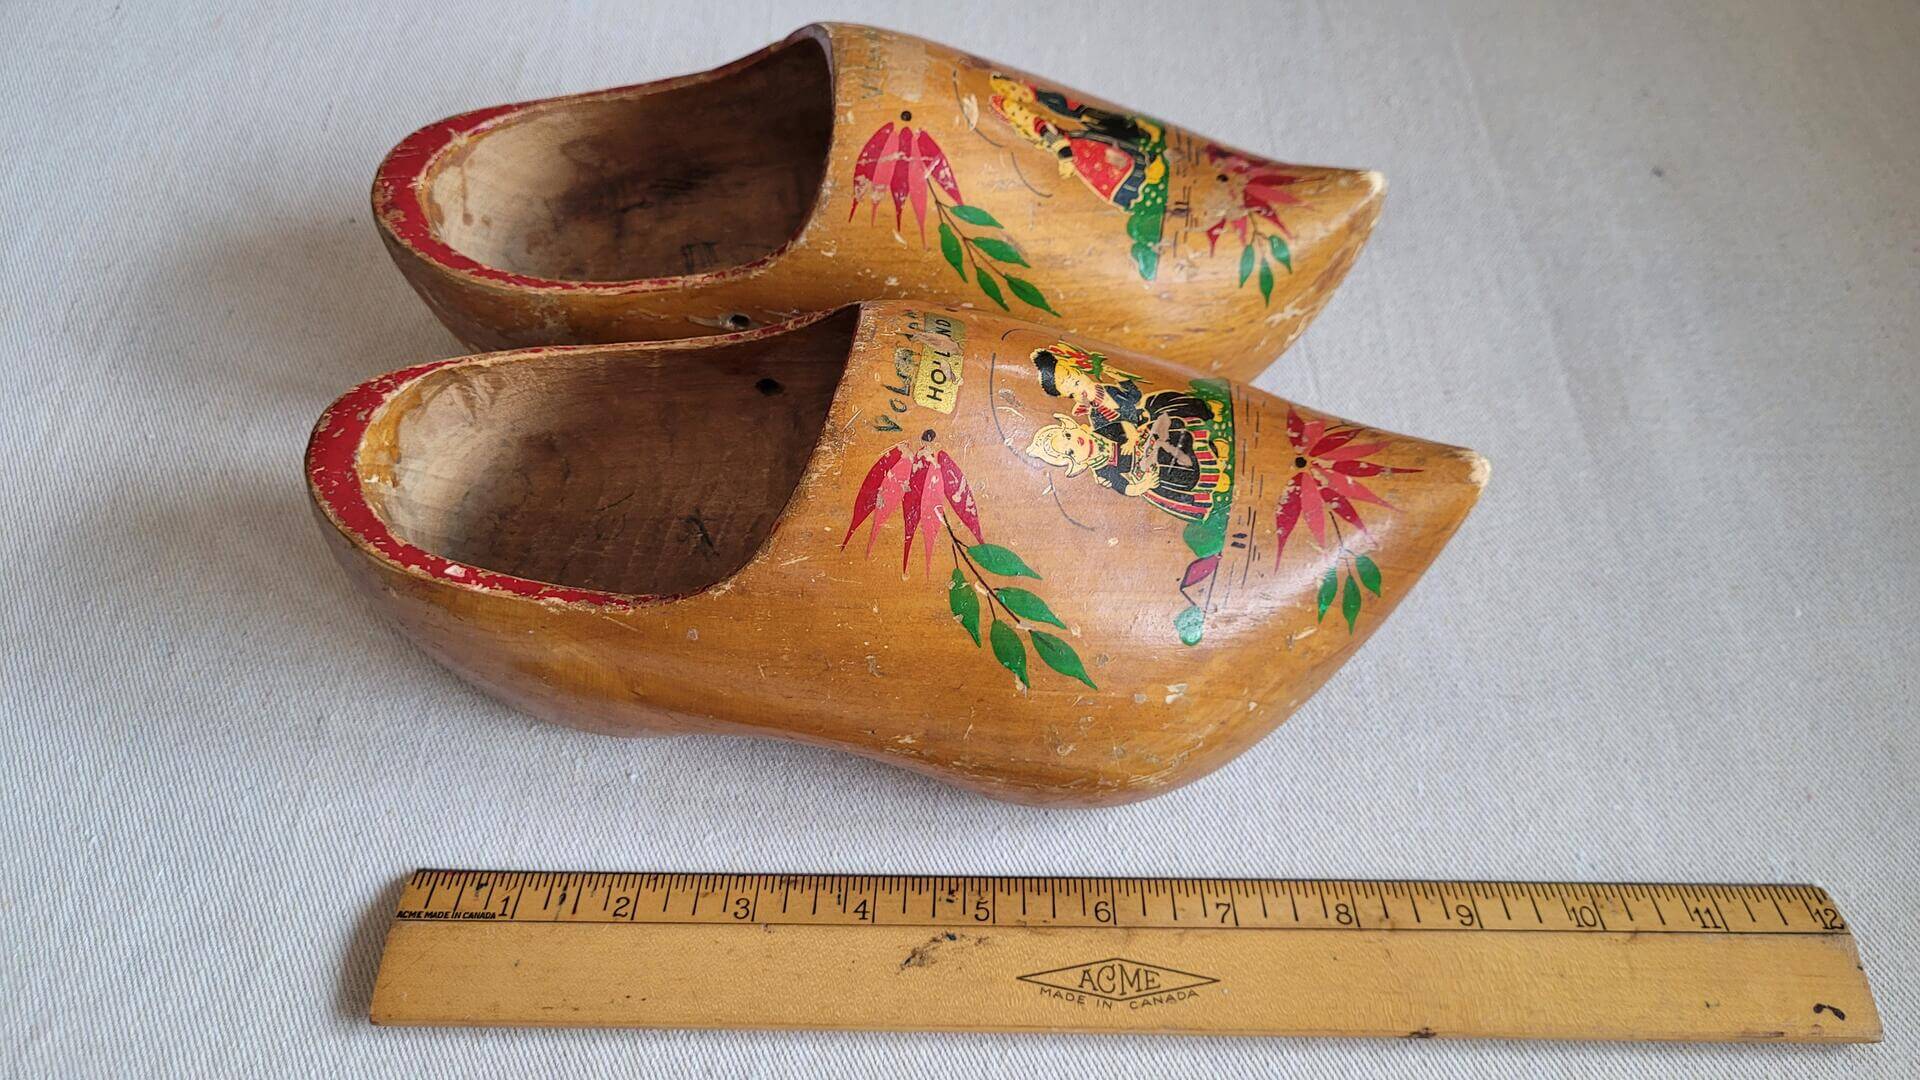 Nice vintage pair of hand painted wooden Dutch clogs with girls motif. Antique made in Holland collectible decorative hand made wood objects and art